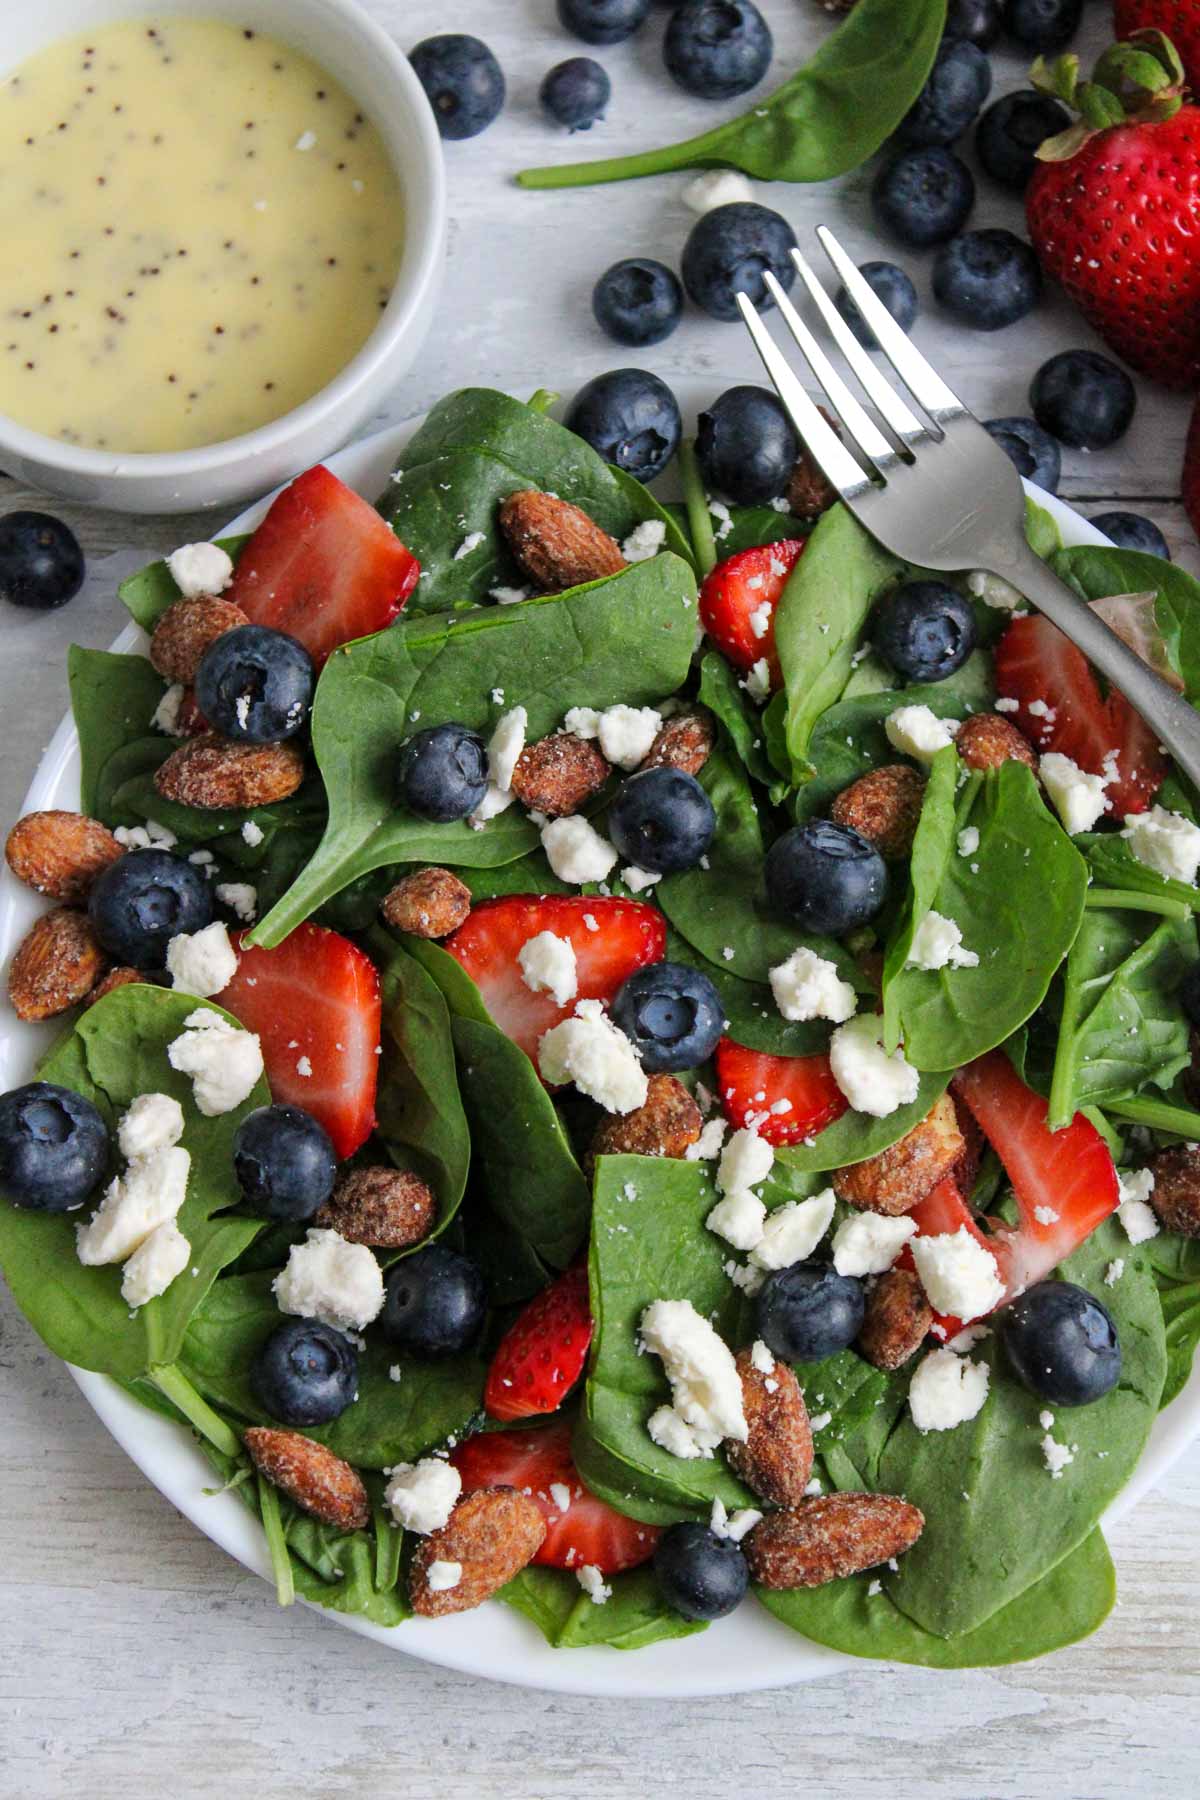 Blueberry salad with candied almonds